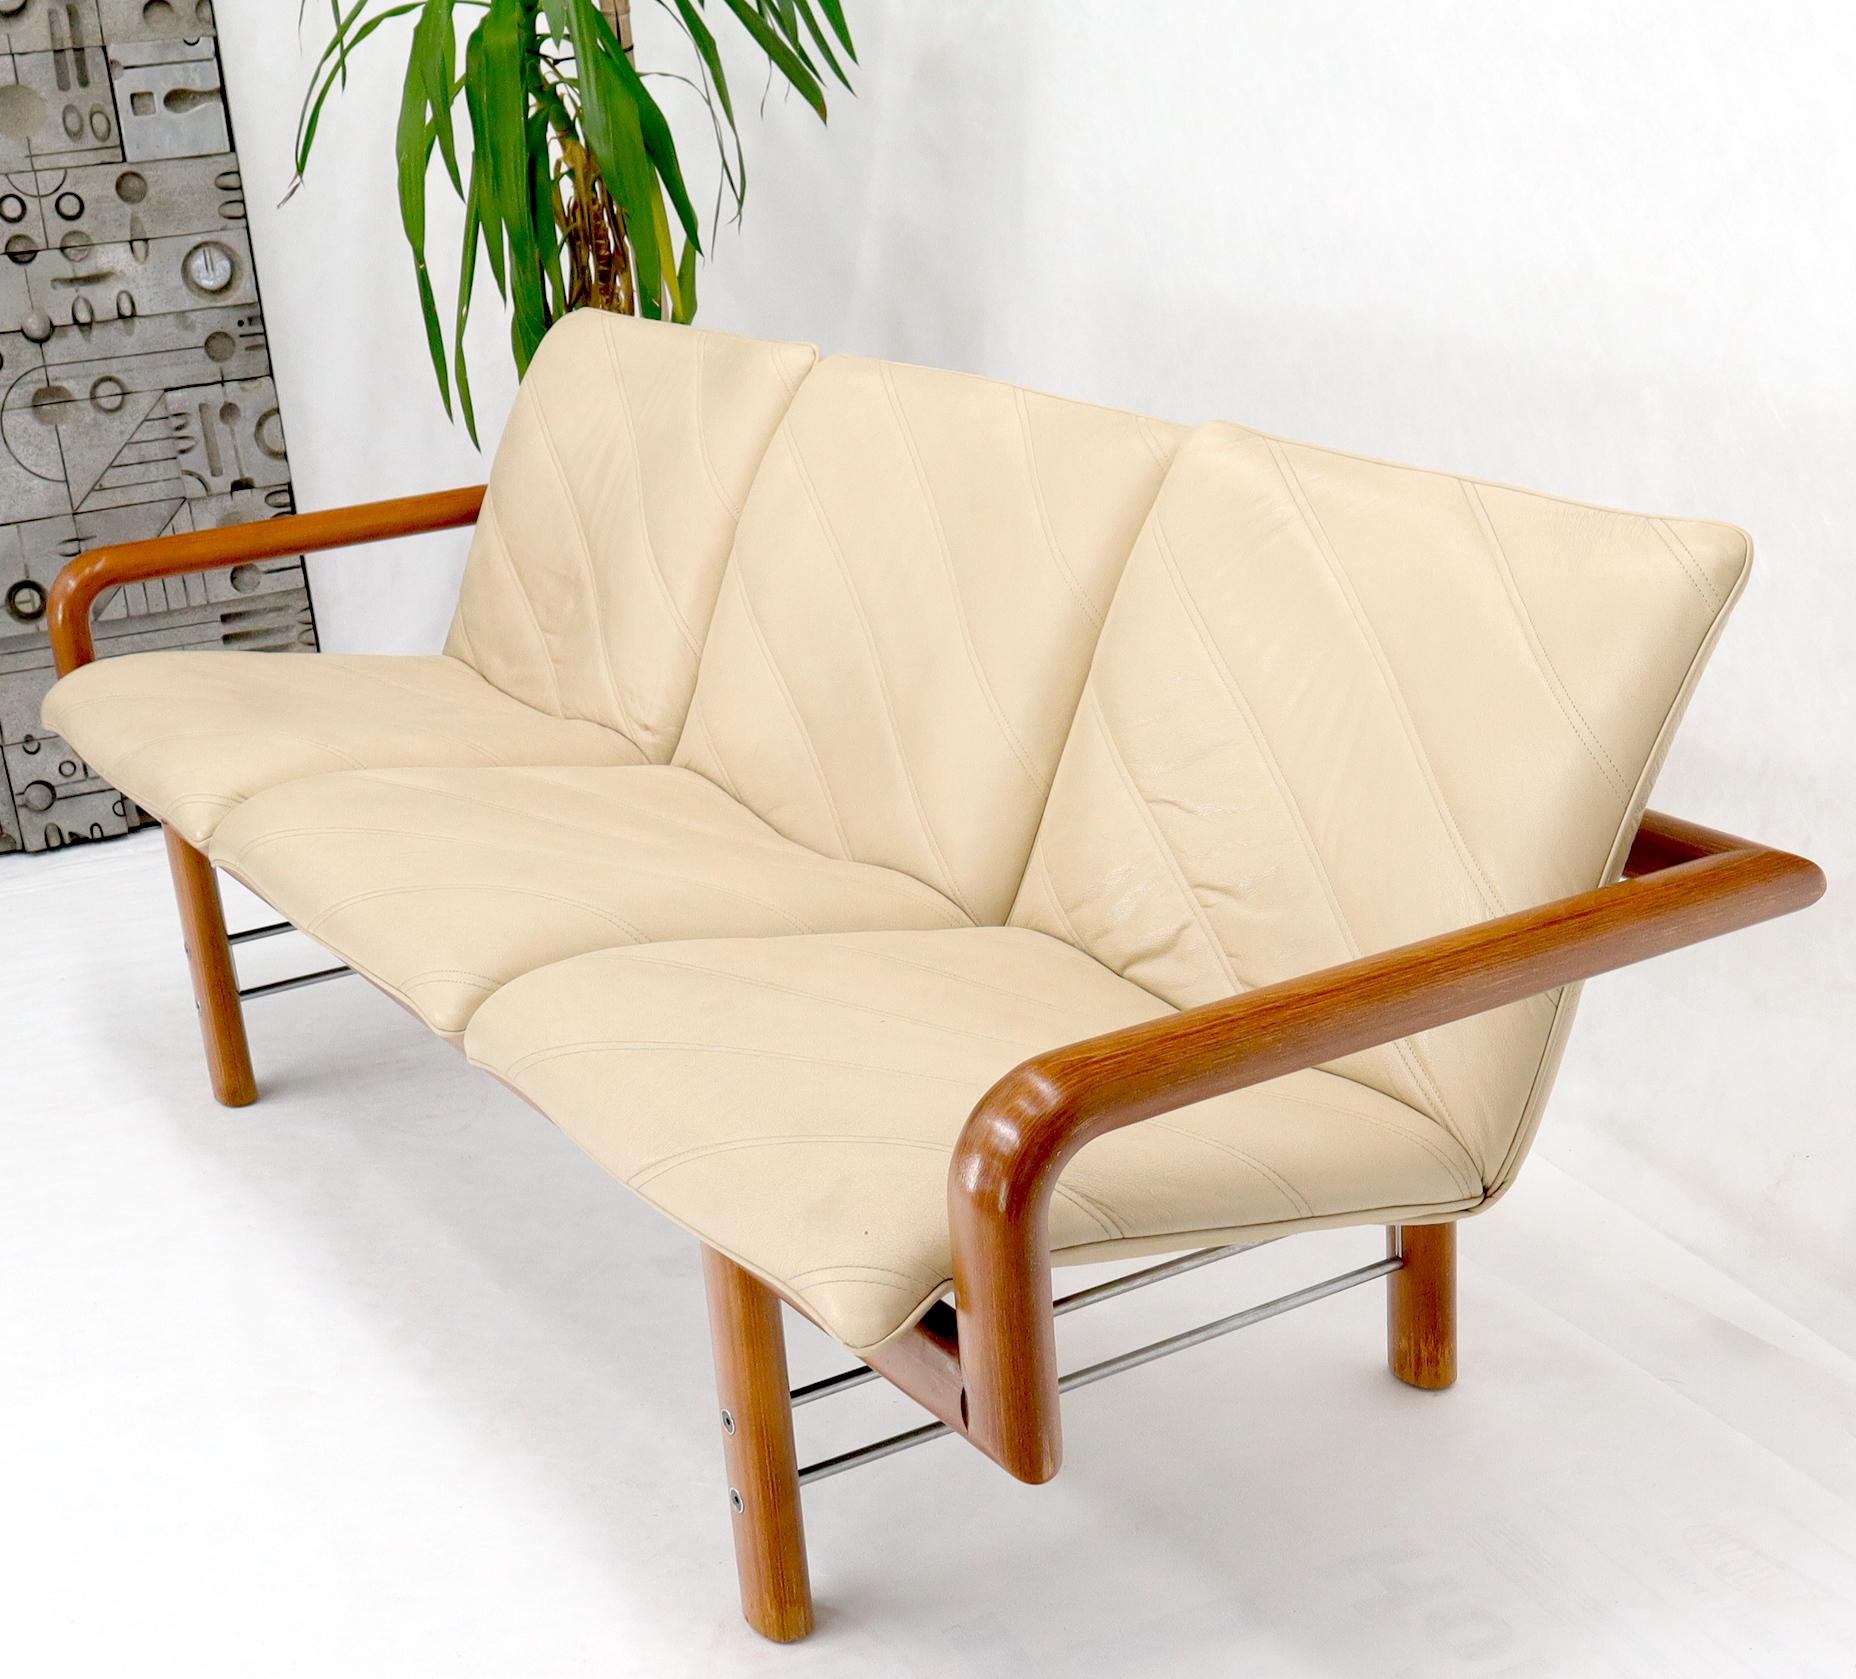 20th Century Leather and Teak Midcentury Danish Modern Floating Sofa For Sale